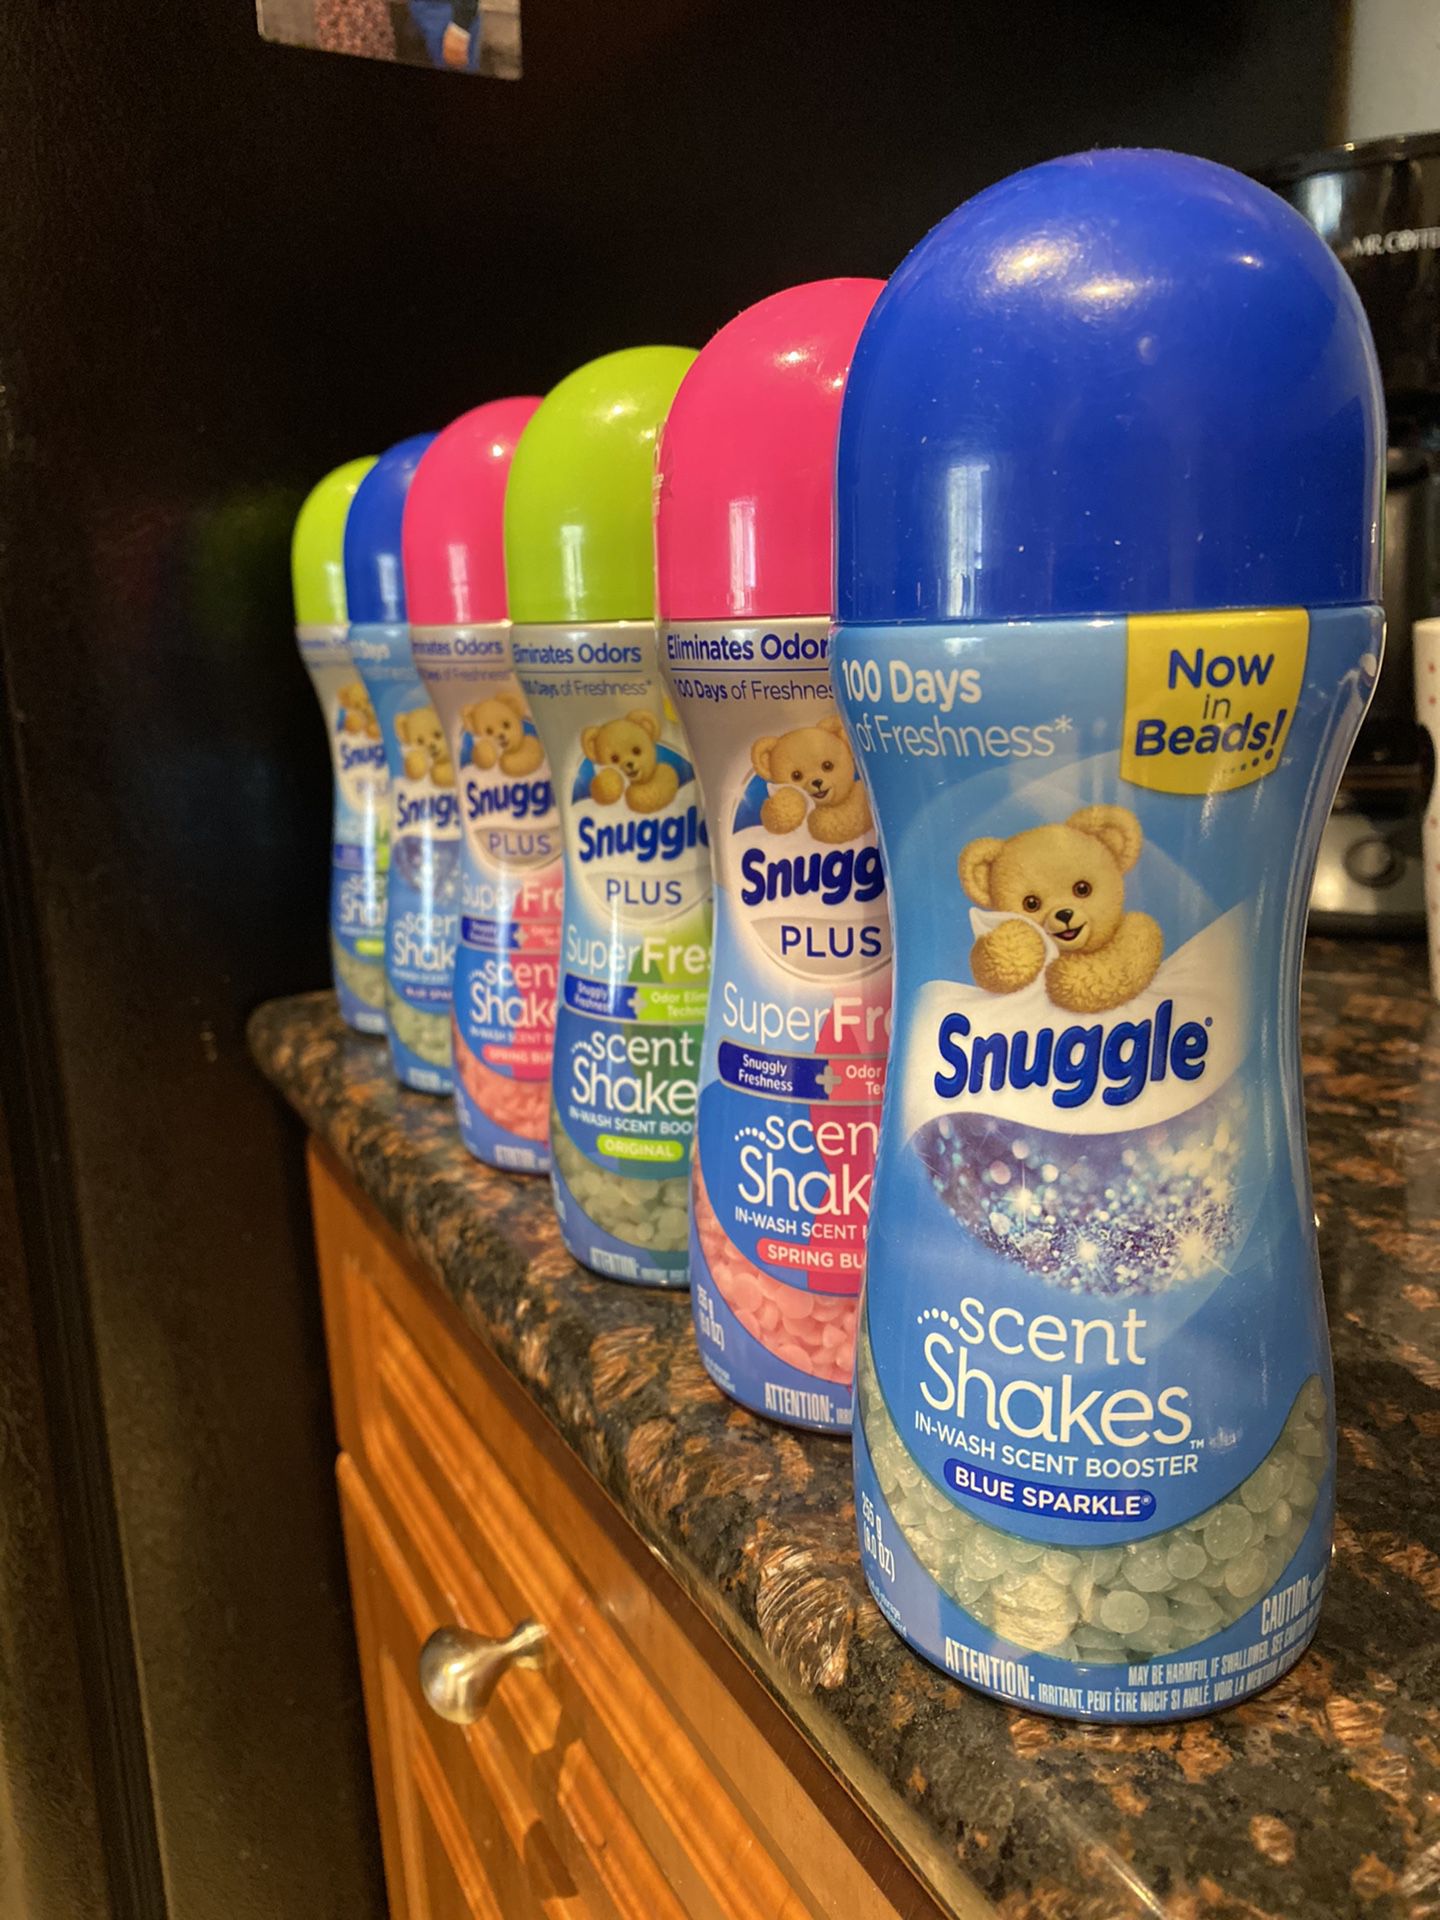 Snuggle Scent Shakes (6) For$18 (7)For$20